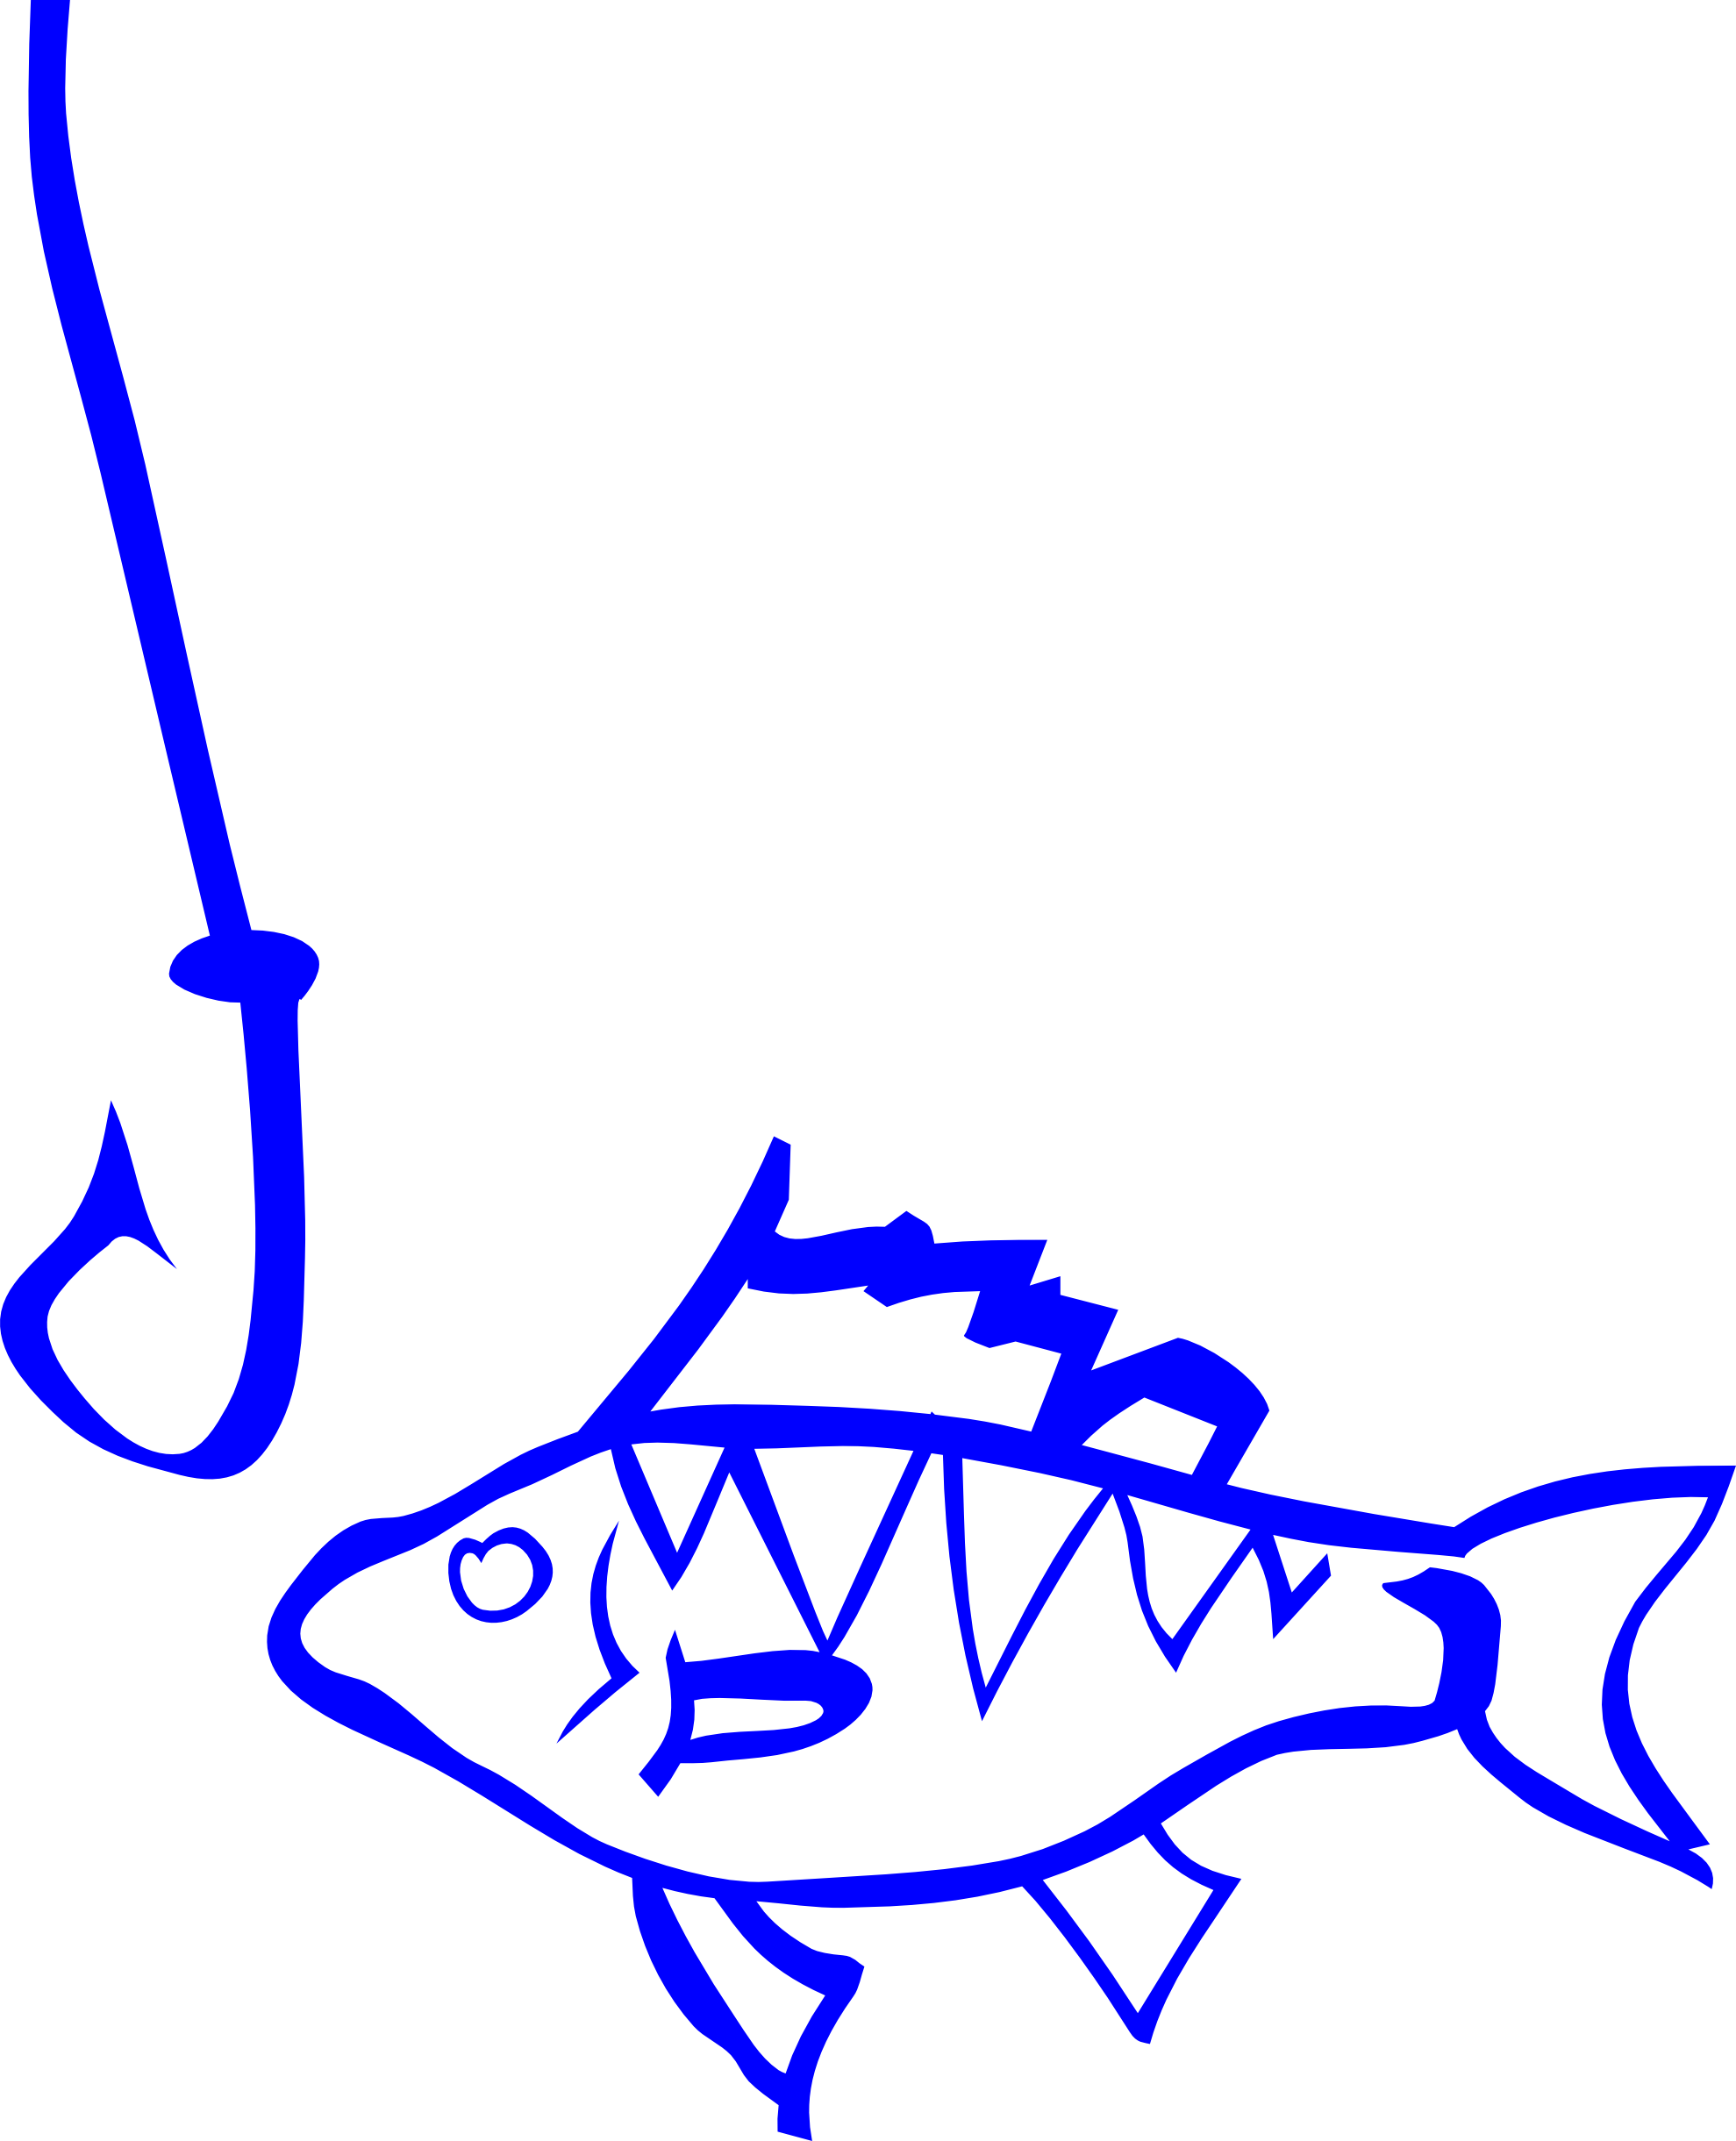 Fishing Hook And Line Clipart   Clipart Panda   Free Clipart Images